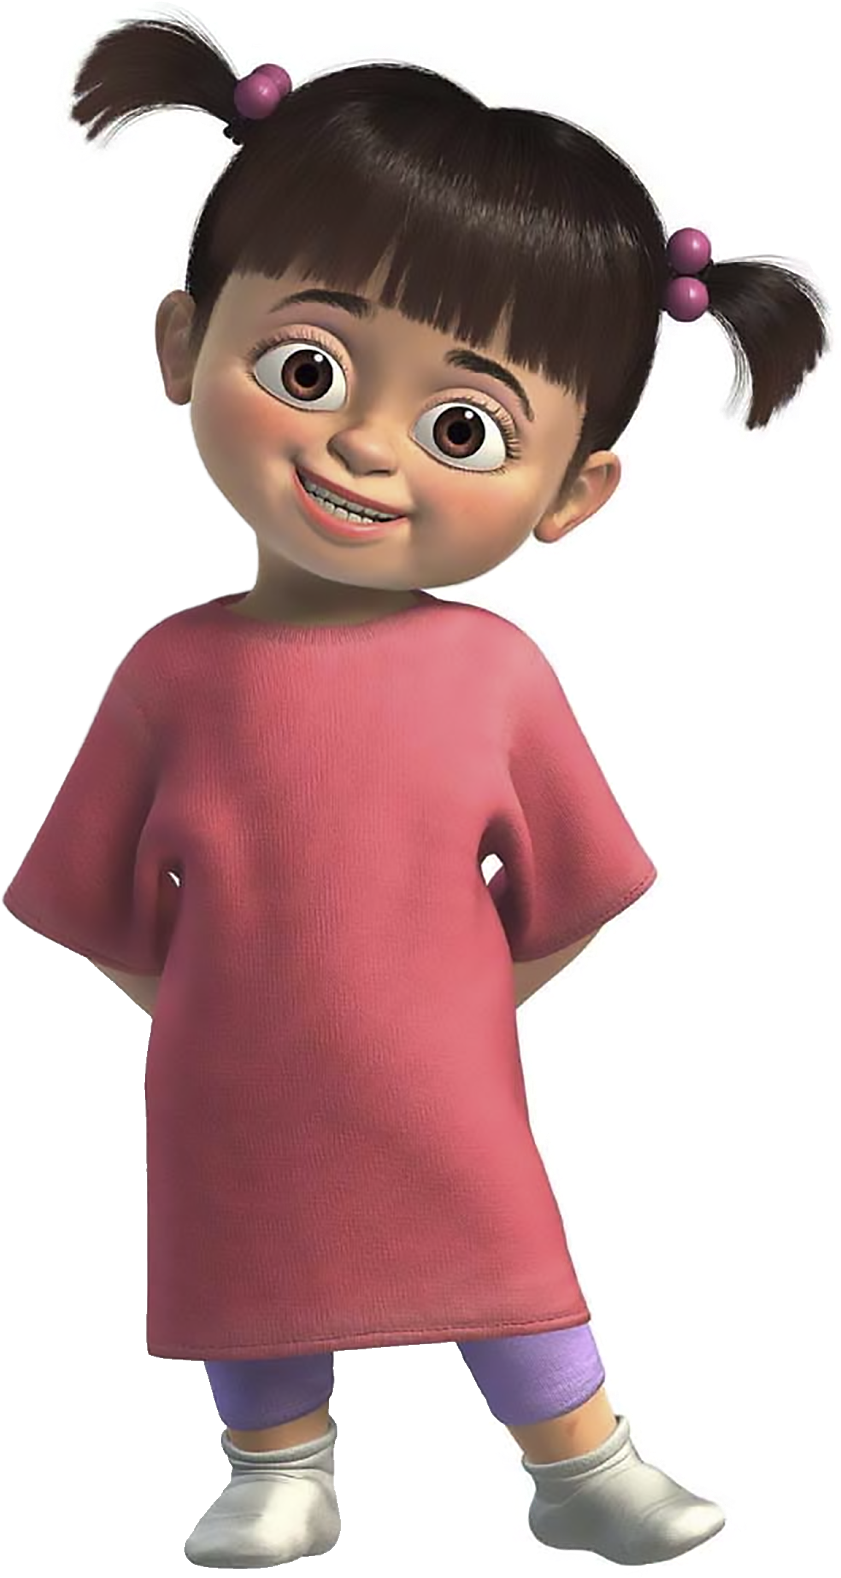 Download Monsters Inc Characters Png Transparent Monsters Inc - Boo